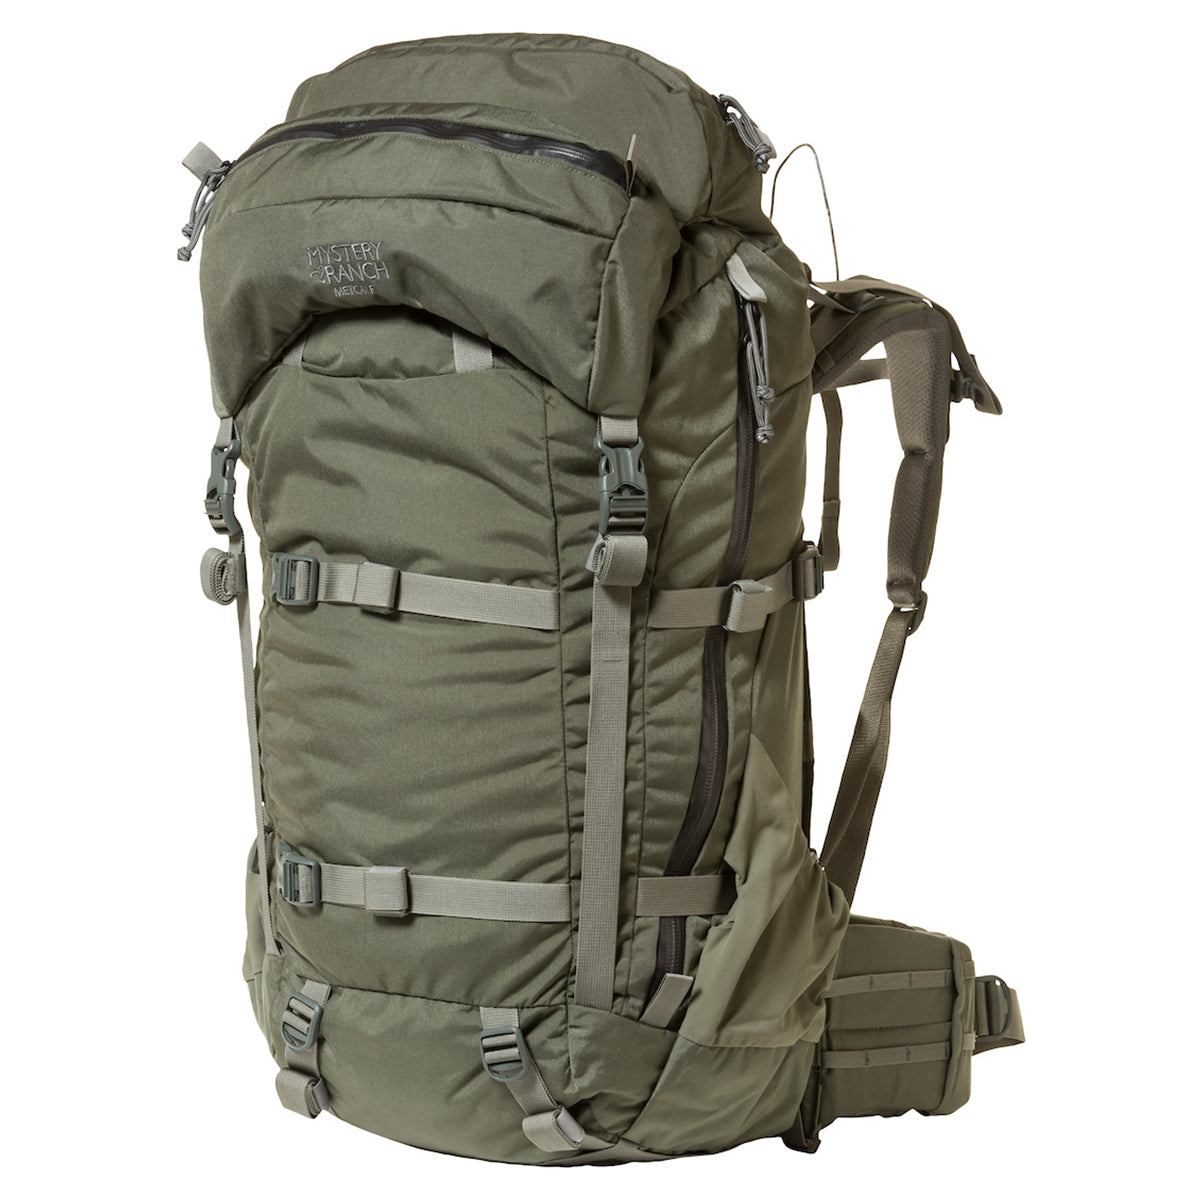 Mystery Ranch Metcalf Backpack in Mystery Ranch Metcalf Backpack (2020) by Mystery Ranch | Gear - goHUNT Shop by GOHUNT | Mystery Ranch - GOHUNT Shop